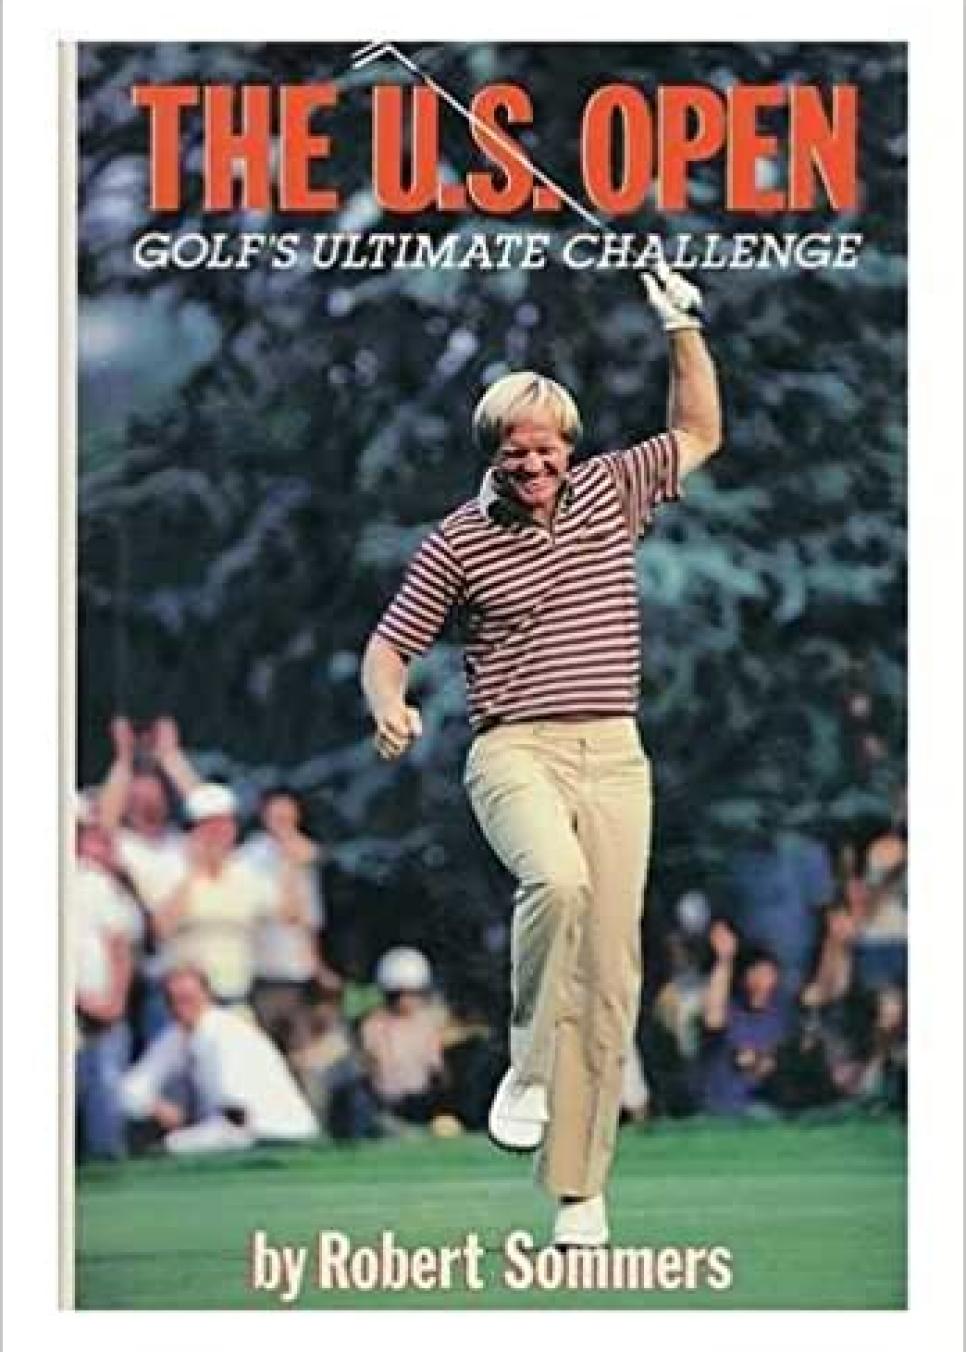 rx-amazonthe-us-open-golfs-ultimate-challenge-by-robert-sommers-1996.jpeg